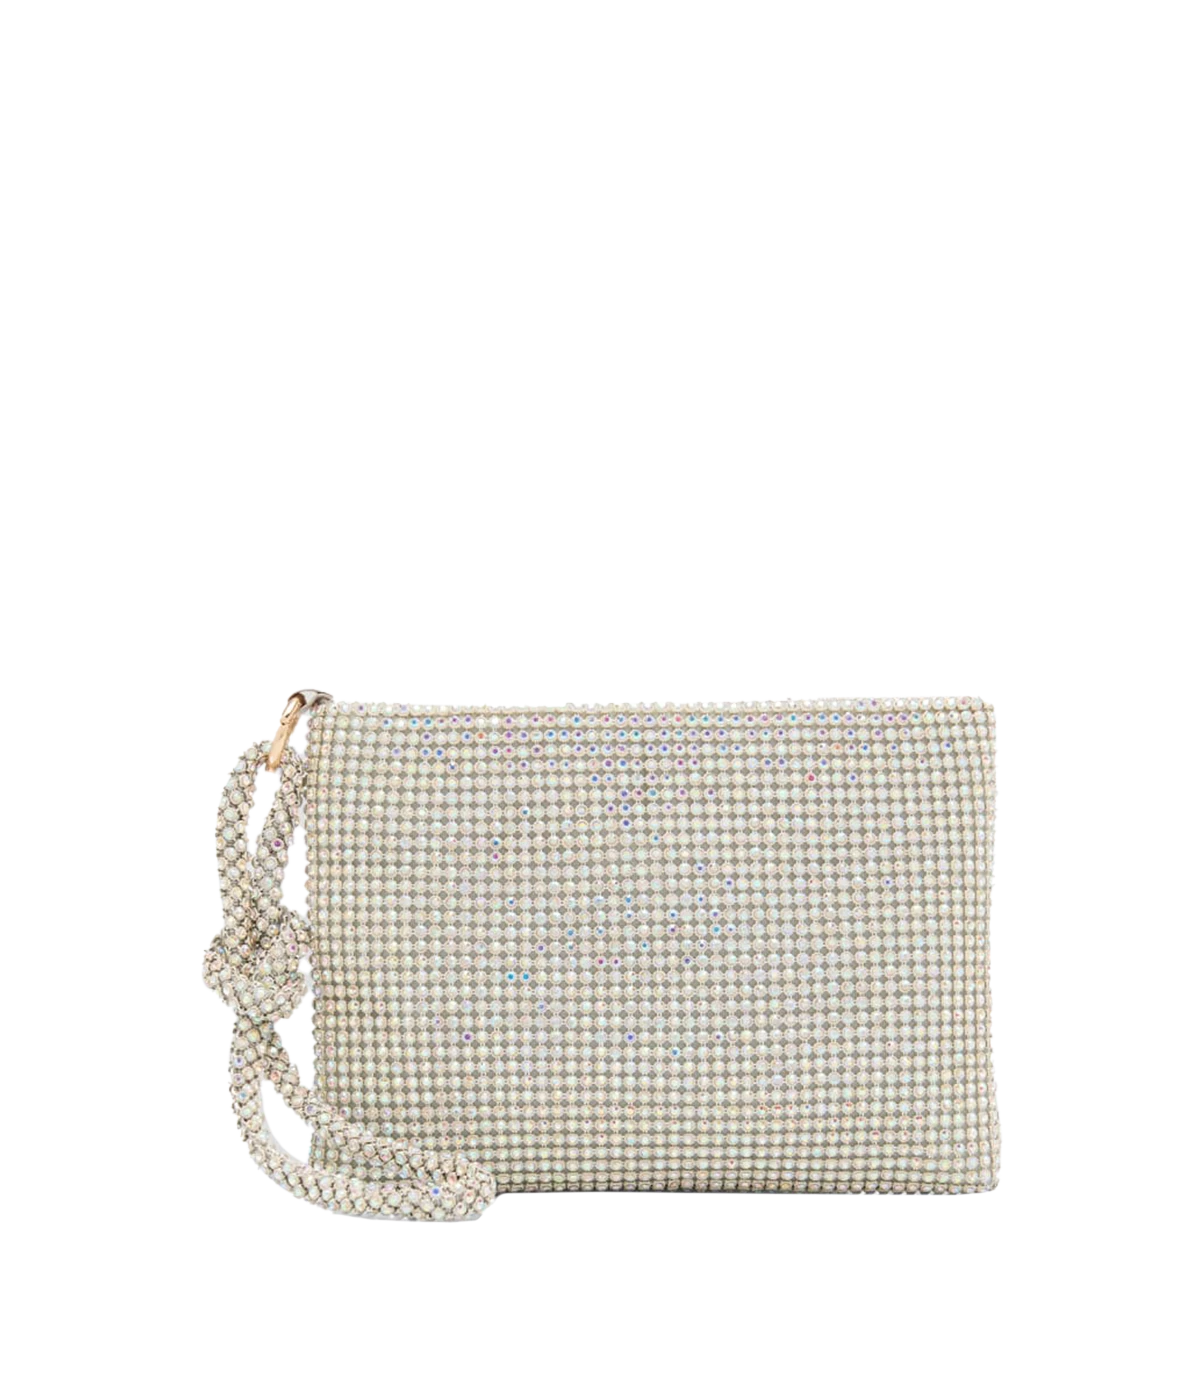 Poppy Knotted Wristlet in Crystal